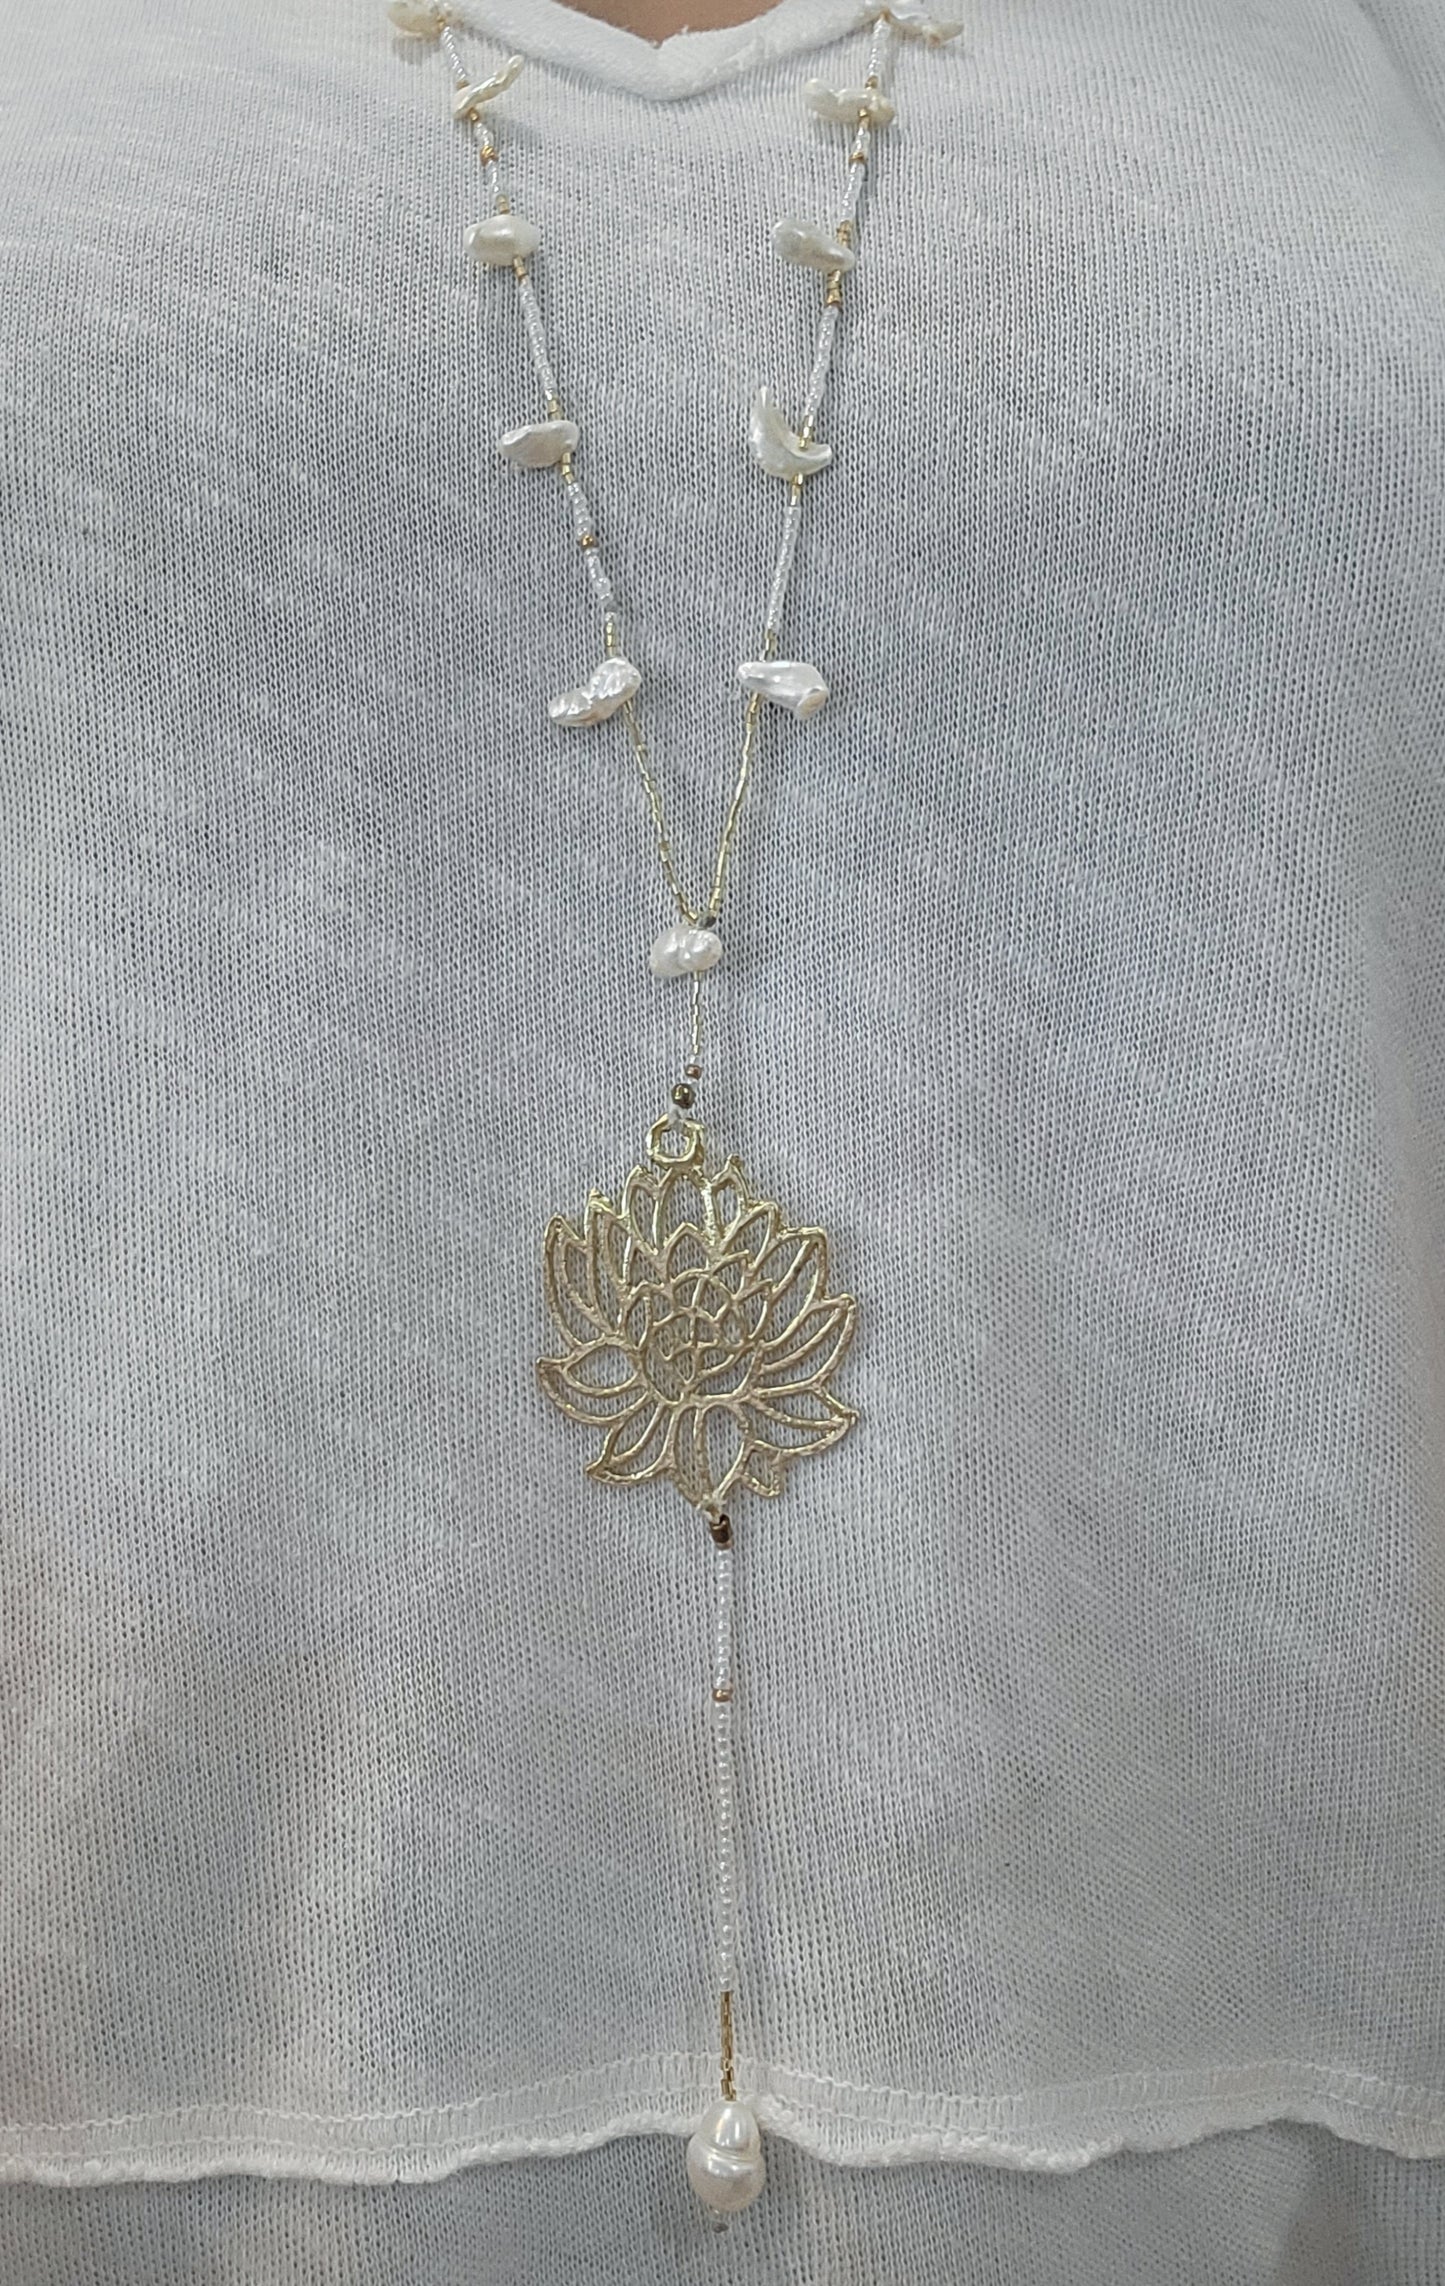 WHITE LOTUS PEARL NECKLACE